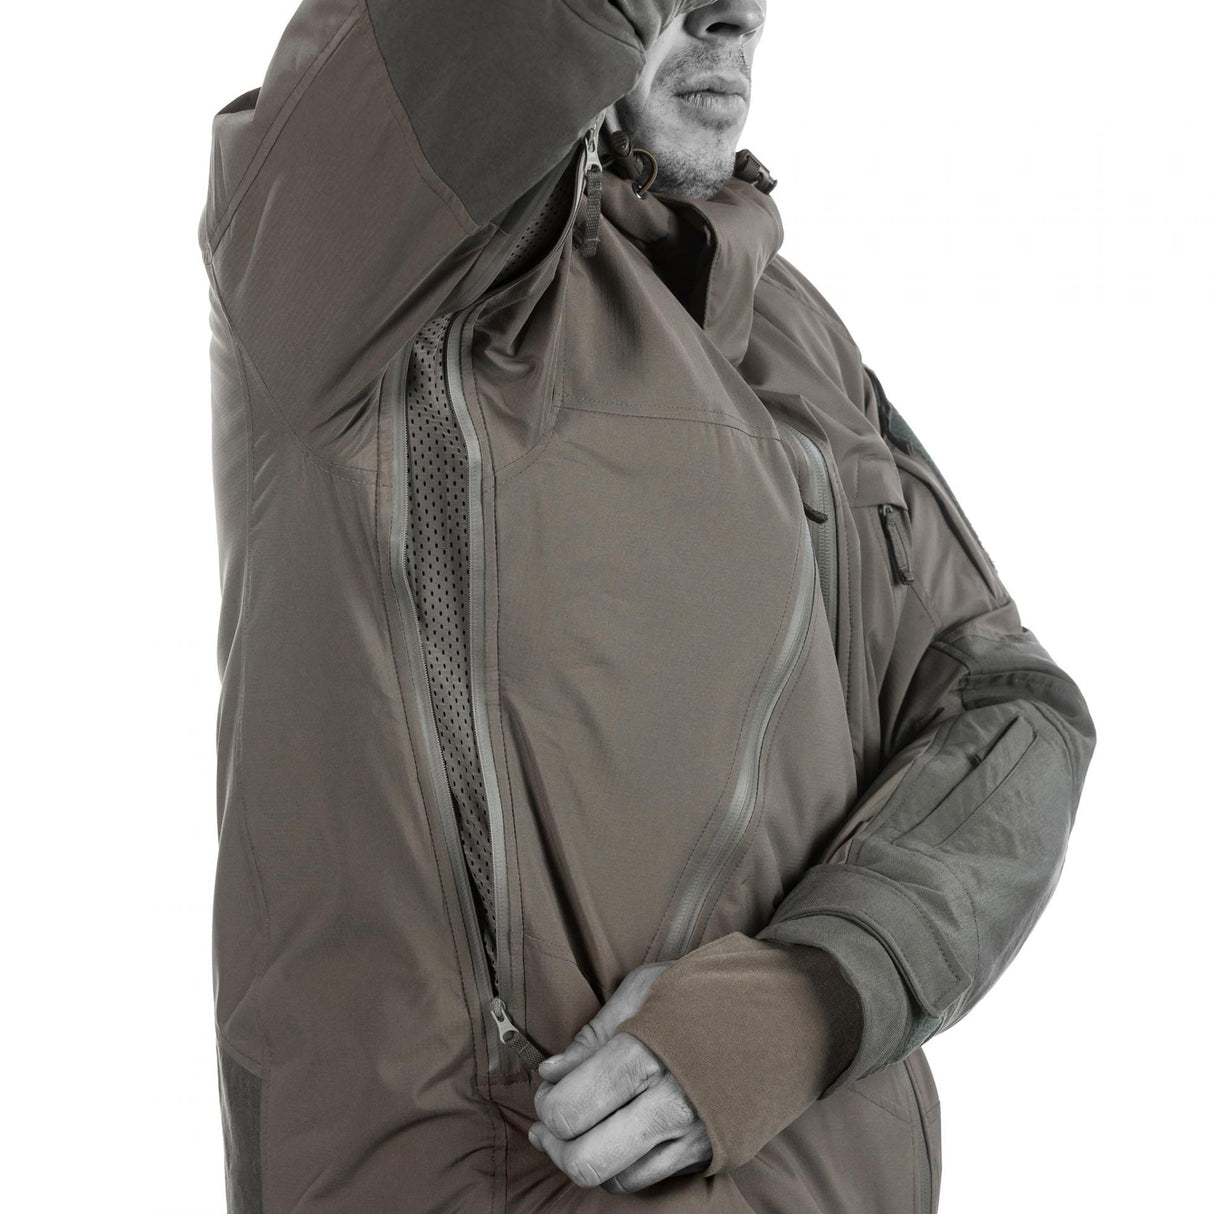 Delta OL 3.0 Jacket: Lightweight construction, thermal insulation, reliable protection.